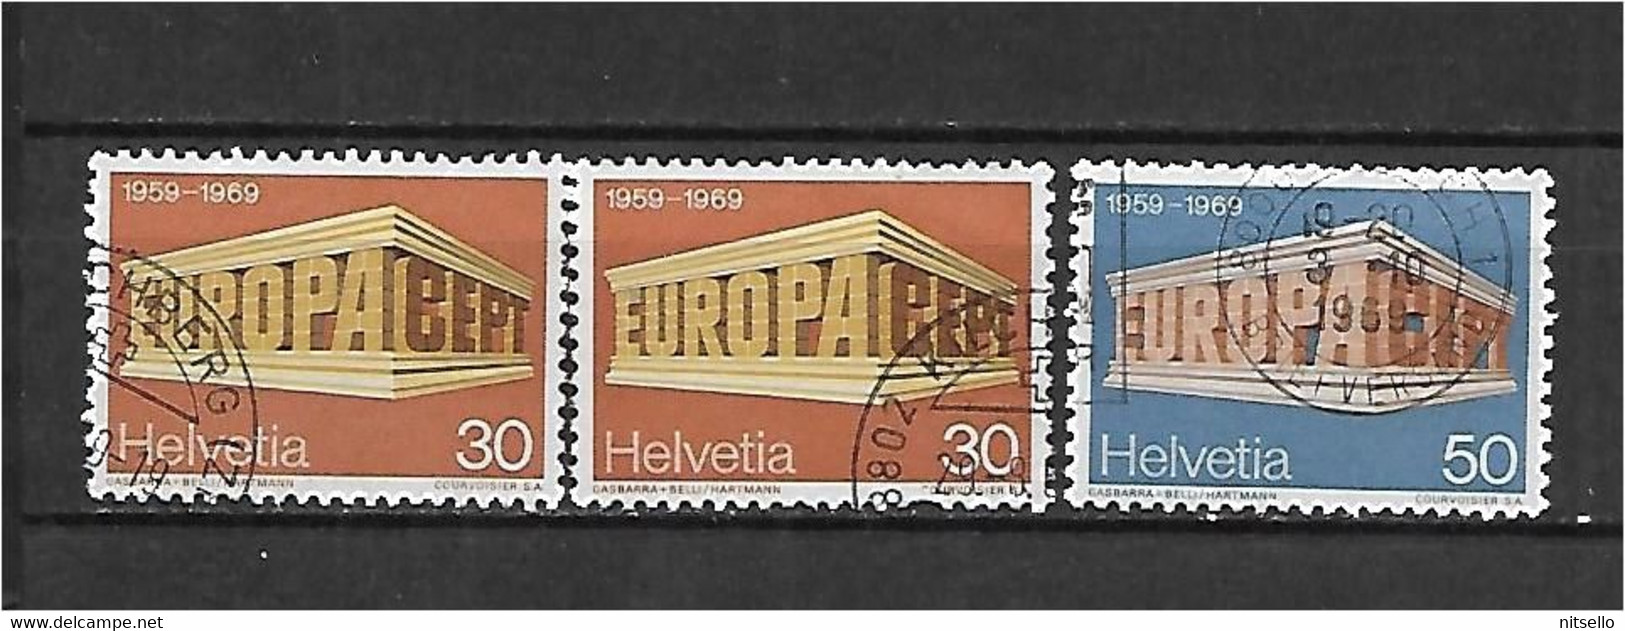 LOTE 1530  ///  SUIZA   YVERT Nº: 832/833  ¡¡¡ OFERTA - LIQUIDATION - JE LIQUIDE !!! - Used Stamps